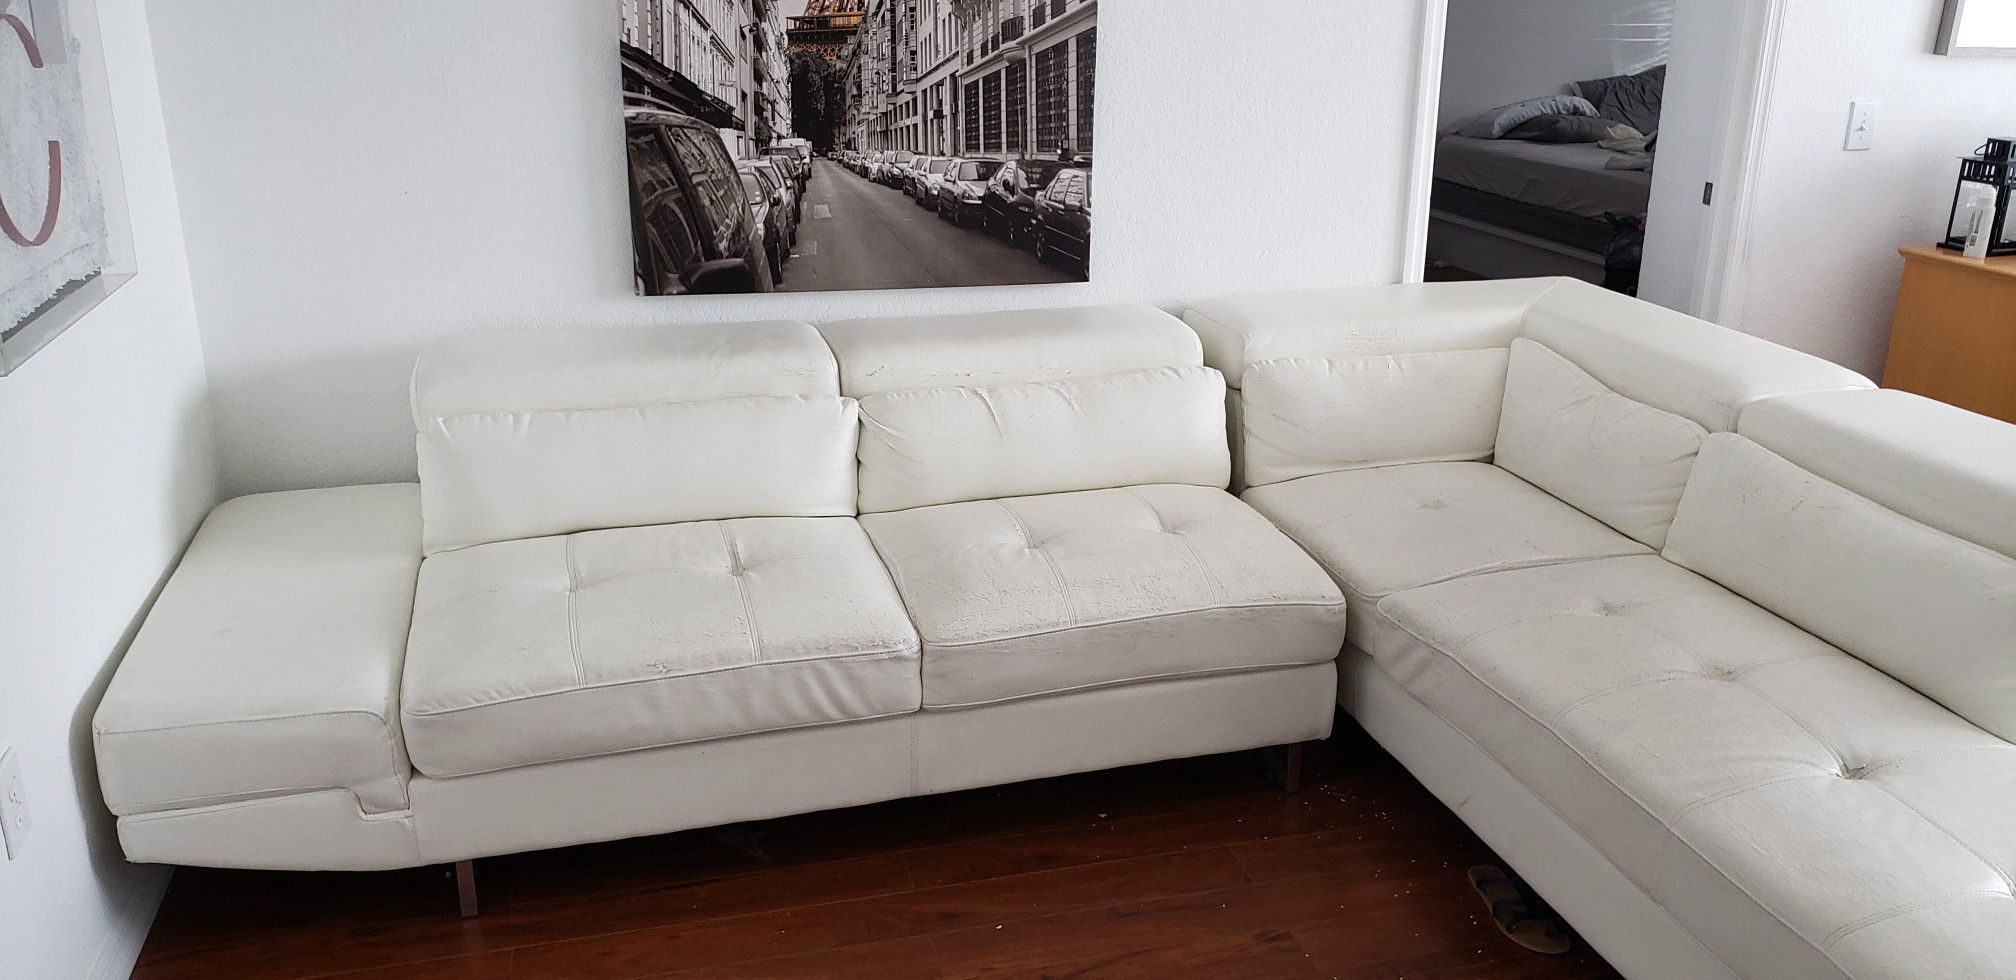 White leather designer sofa / white leather couch